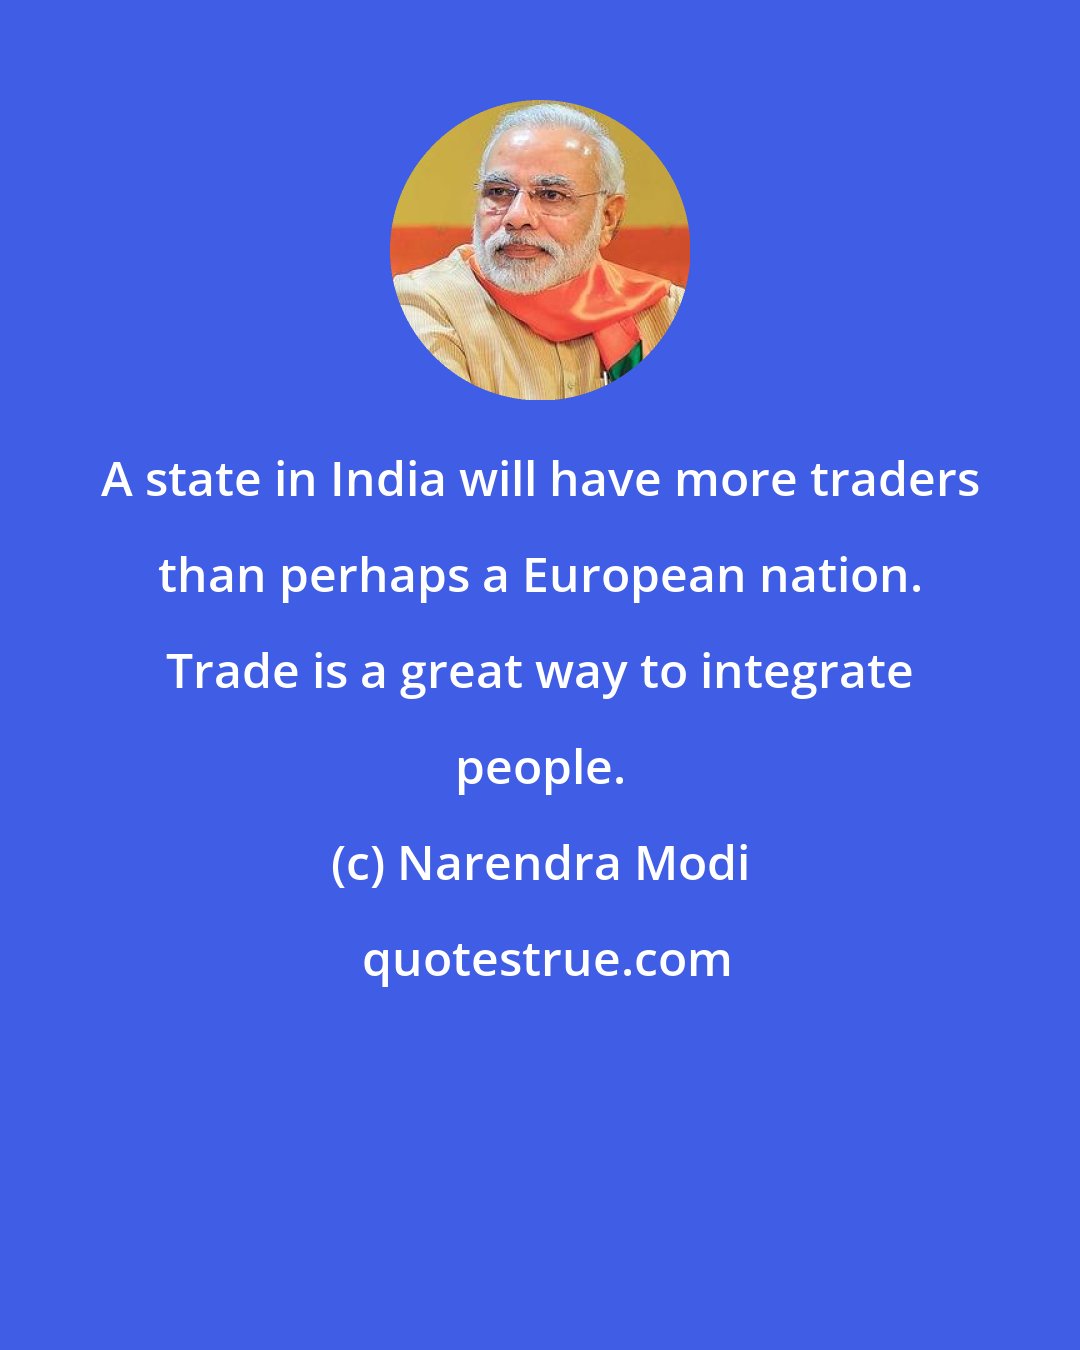 Narendra Modi: A state in India will have more traders than perhaps a European nation. Trade is a great way to integrate people.